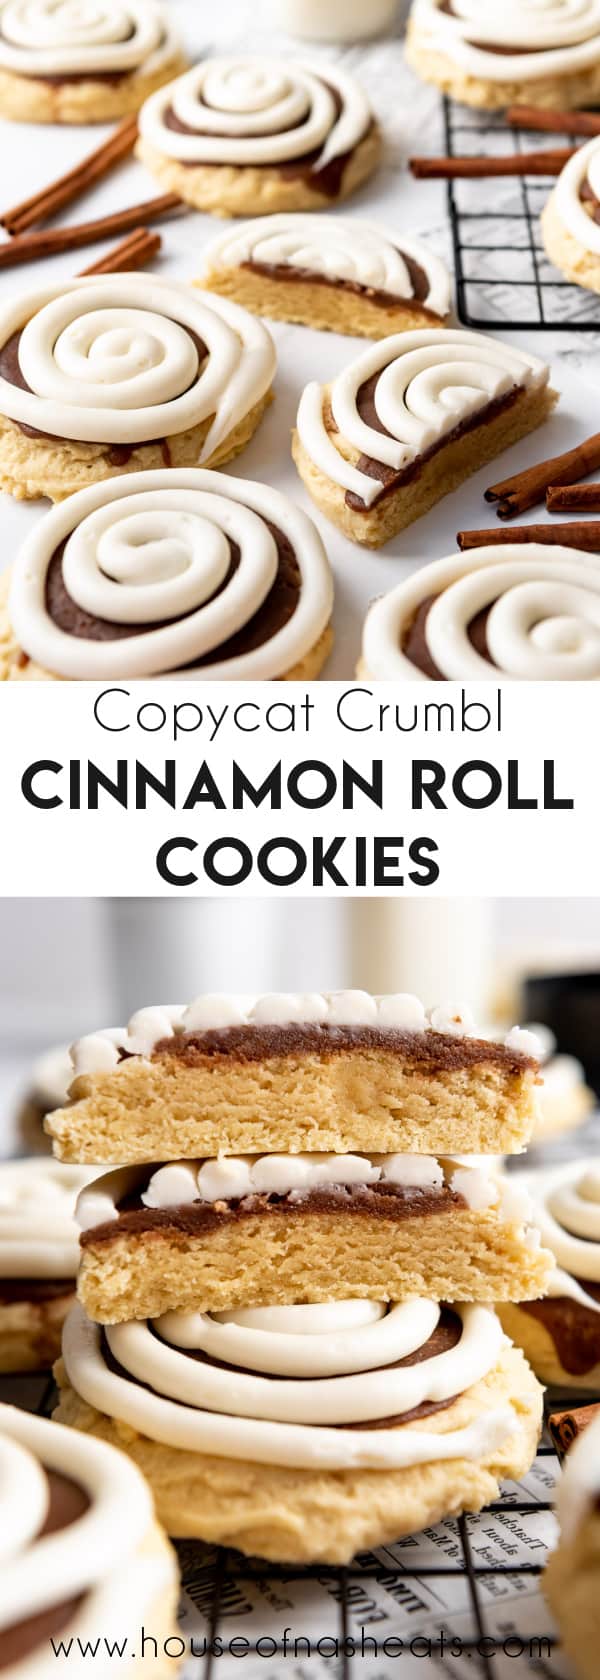 A collage of images of Crumbl copycat cinnamon roll cookies with text overlay.